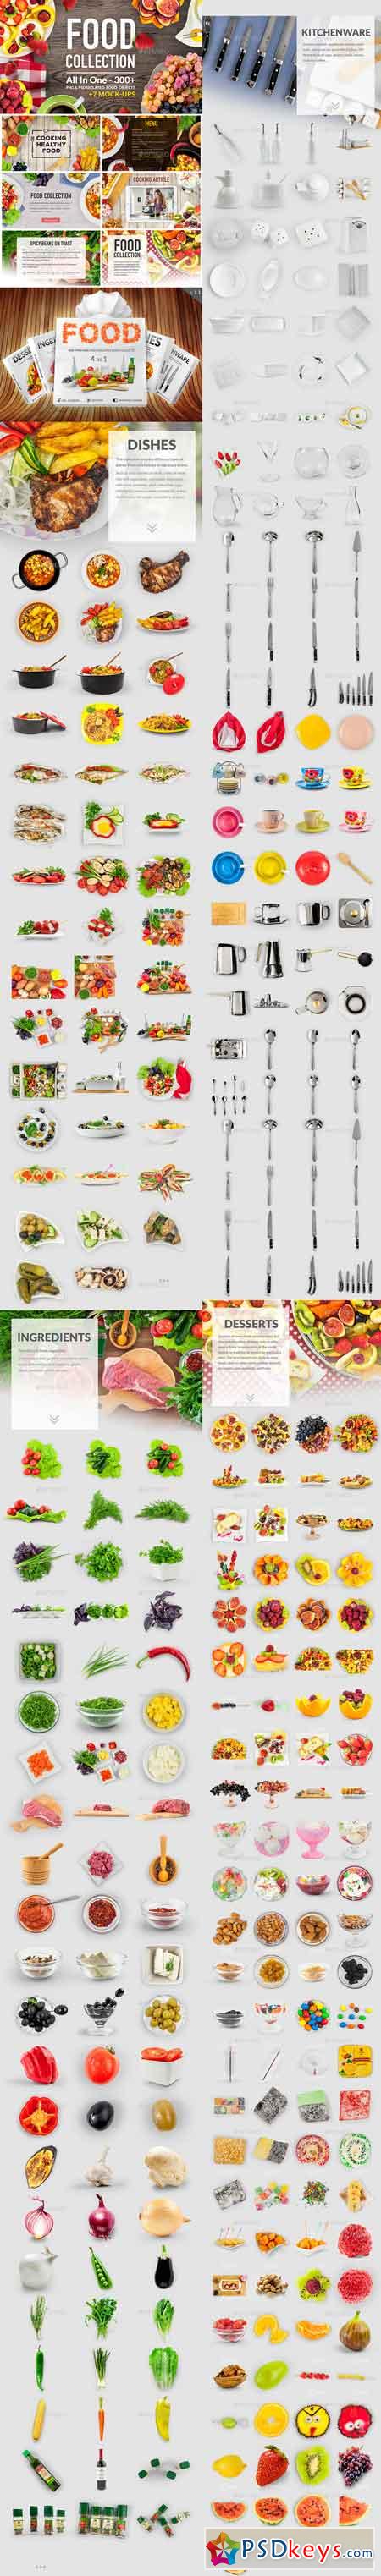 Food Pro Collection 300 Mockup & Hero Images 19307521